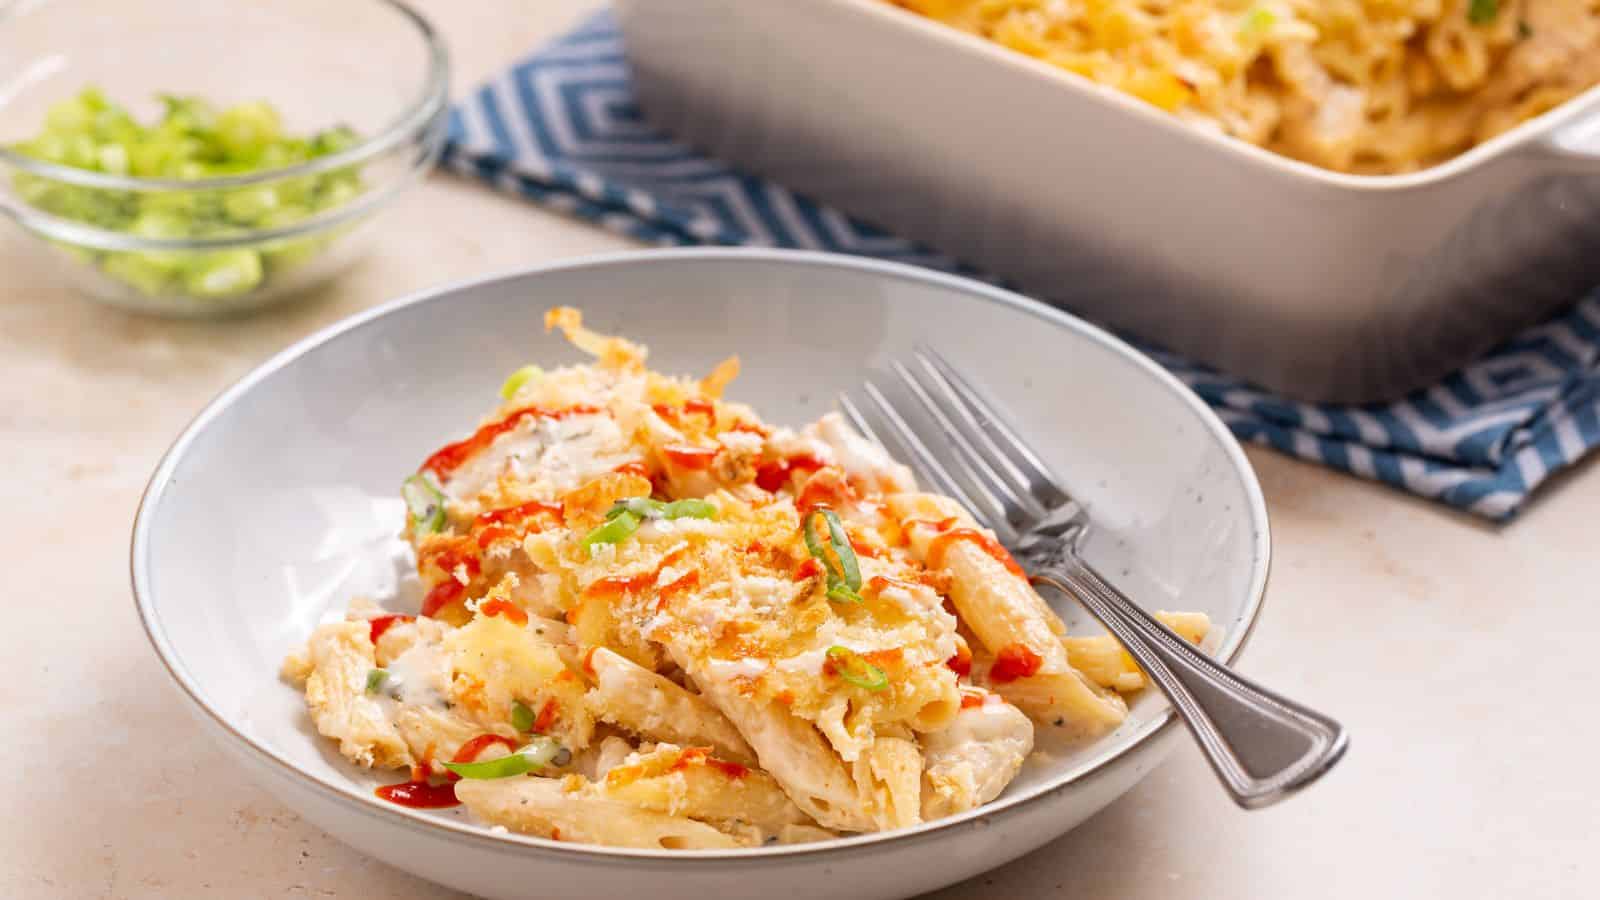 Serving of buffalo chicken pasta bake with casserole dish.